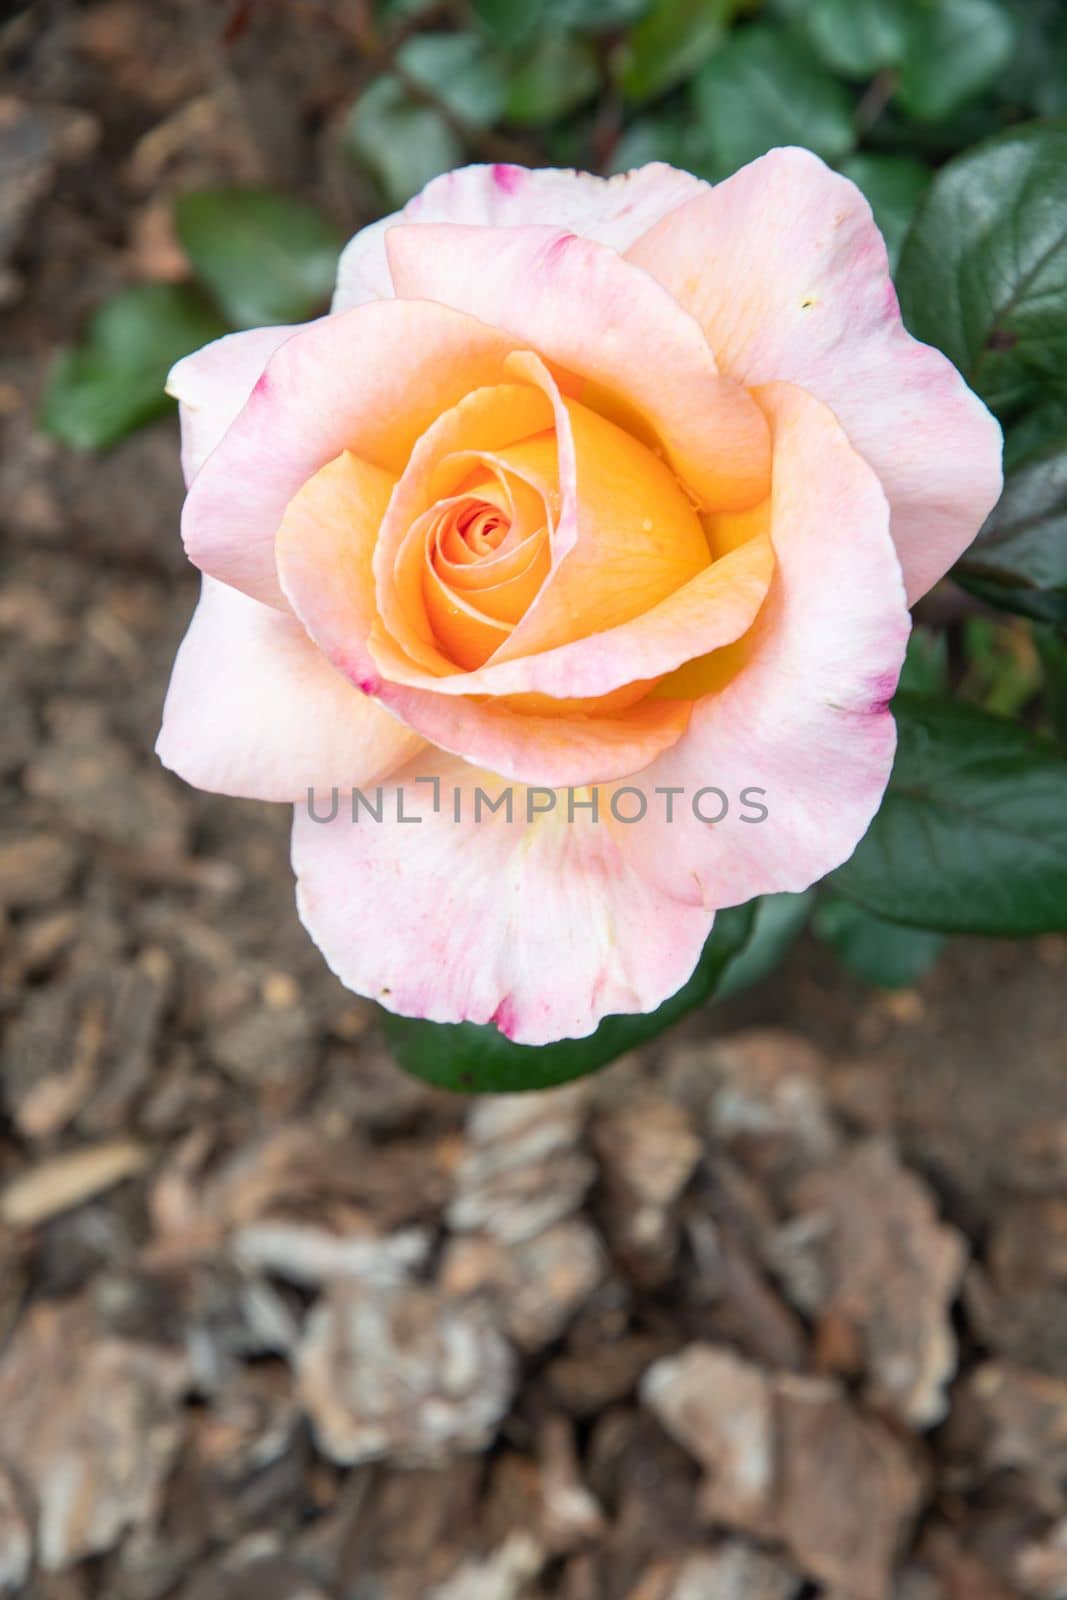 beautiful big creamy pink rose behind in the garden close-up flower portrait by KaterinaDalemans